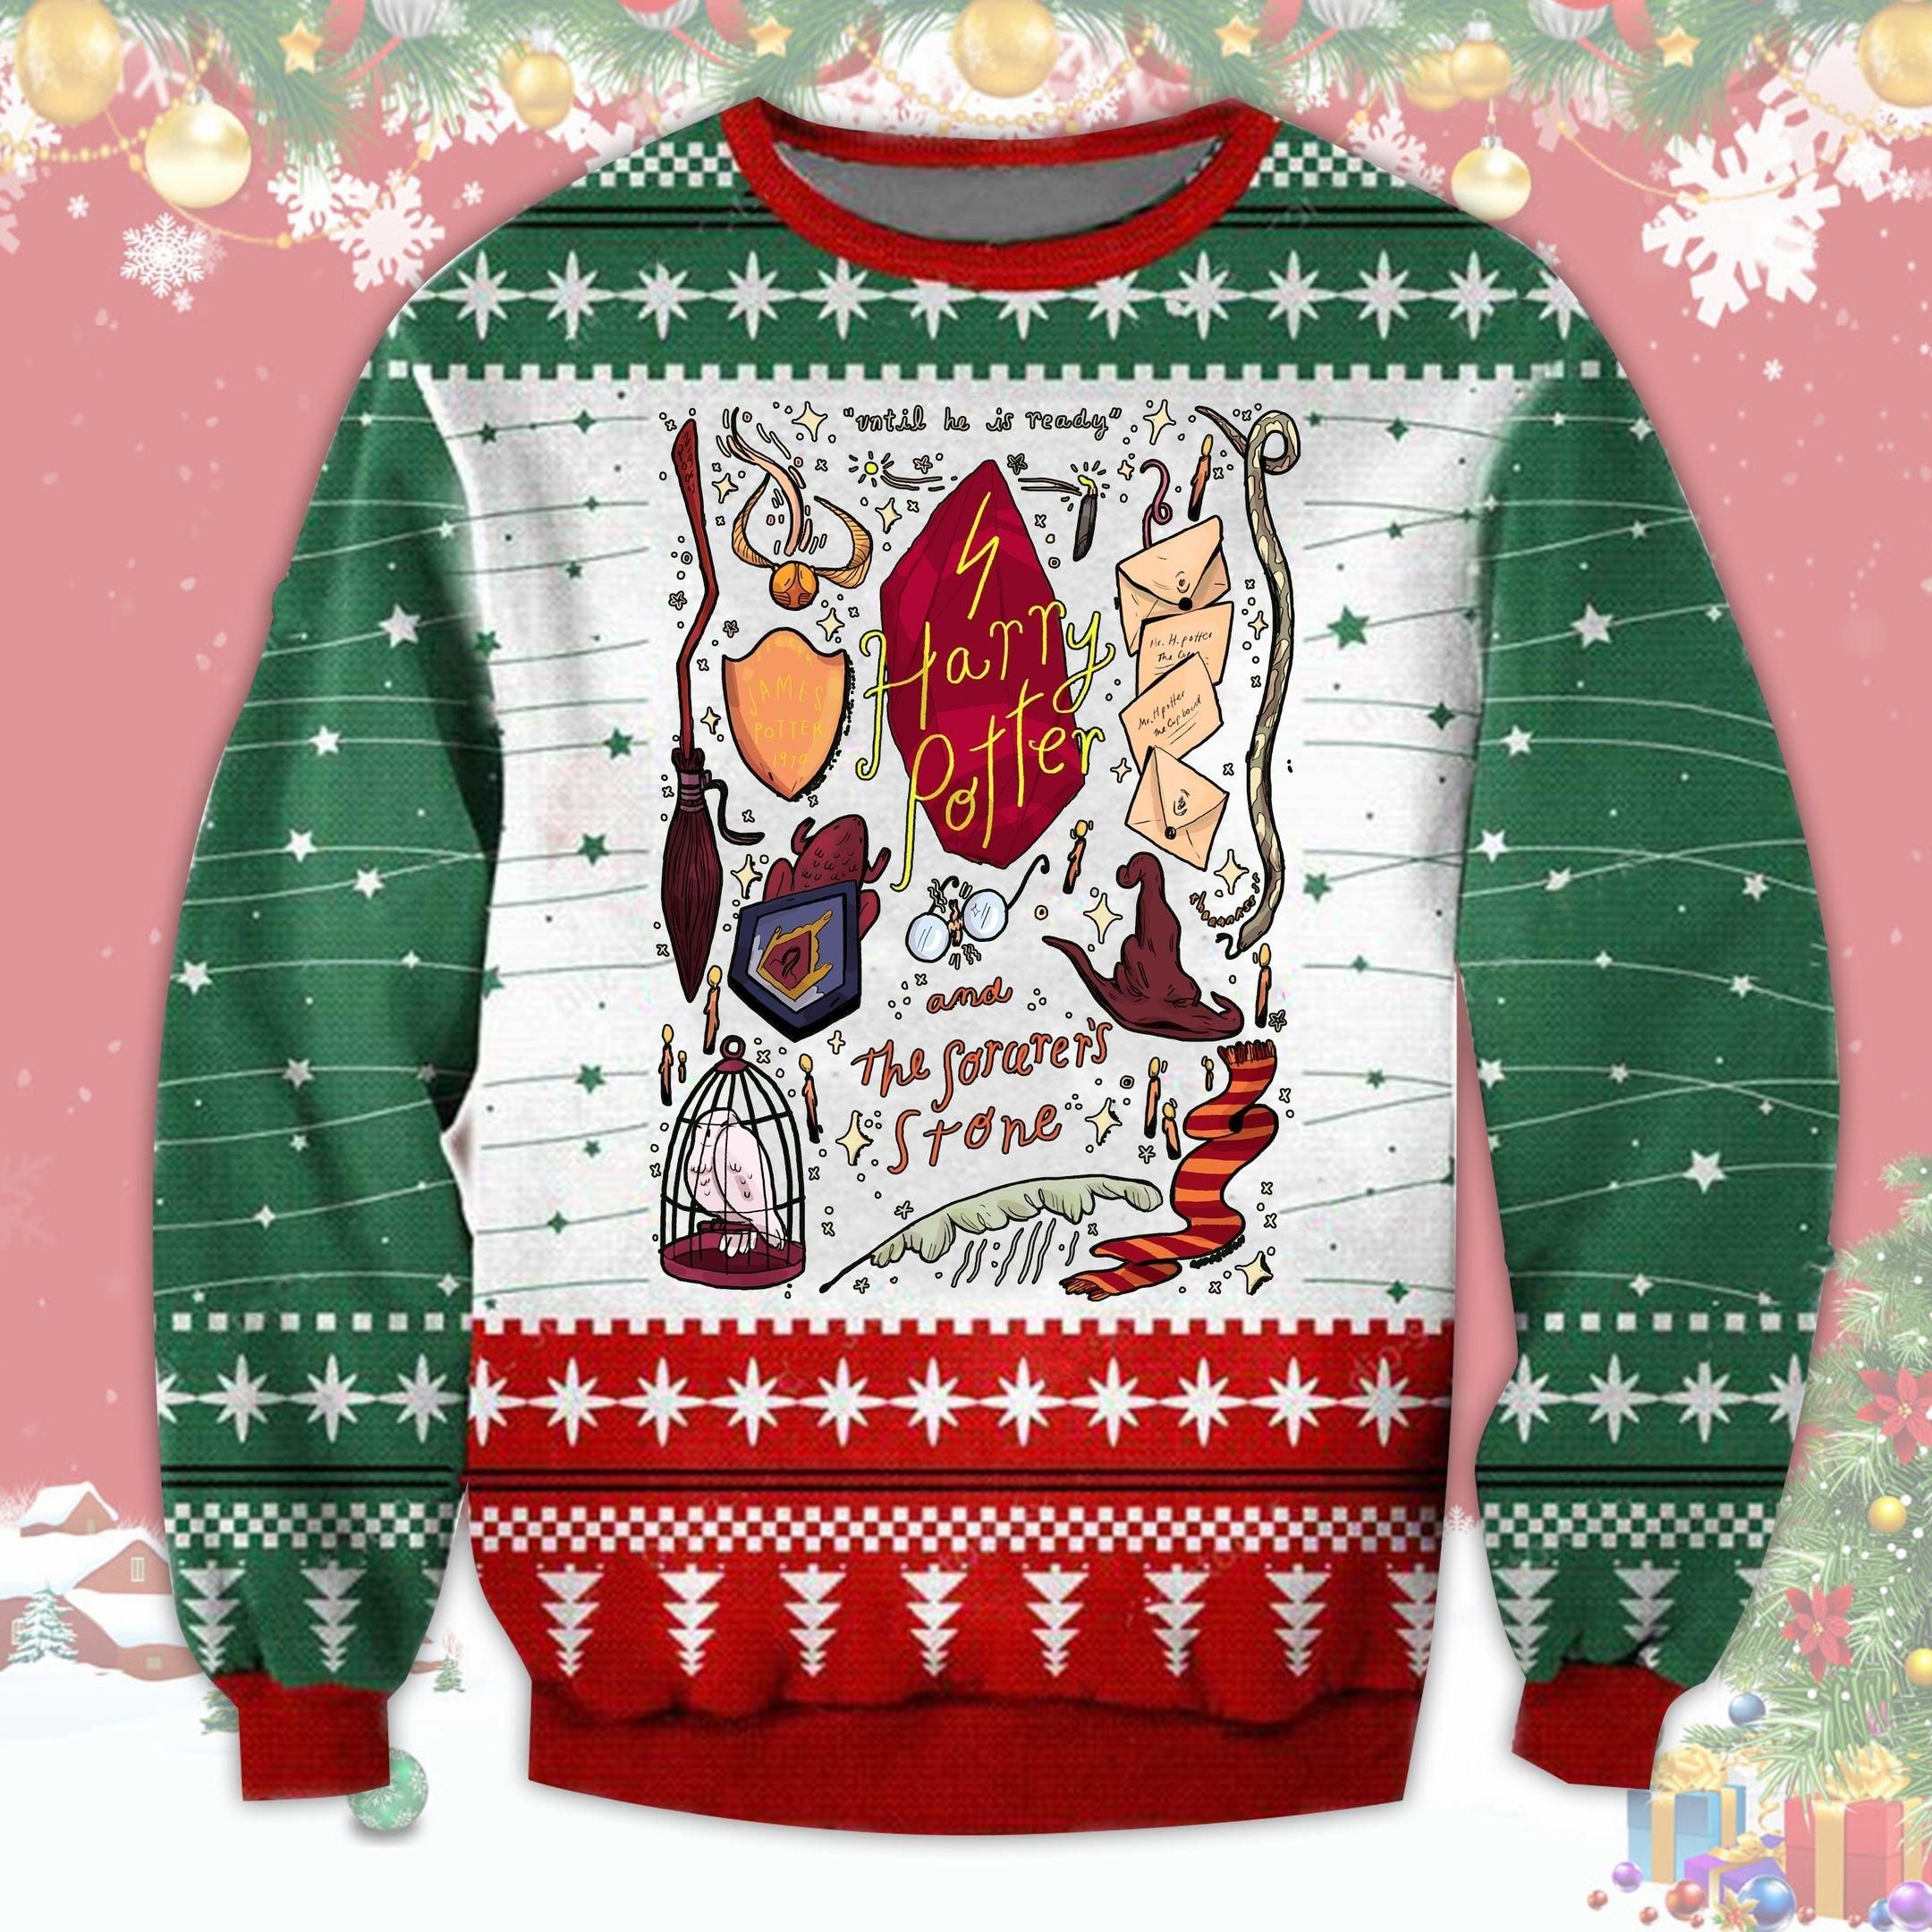 Harry Potter And The Philosopher's Stone Ugly Sweater, Christmas Gift , Harry Potter And The Philosopher's Stone Ugly Christmas Sweater